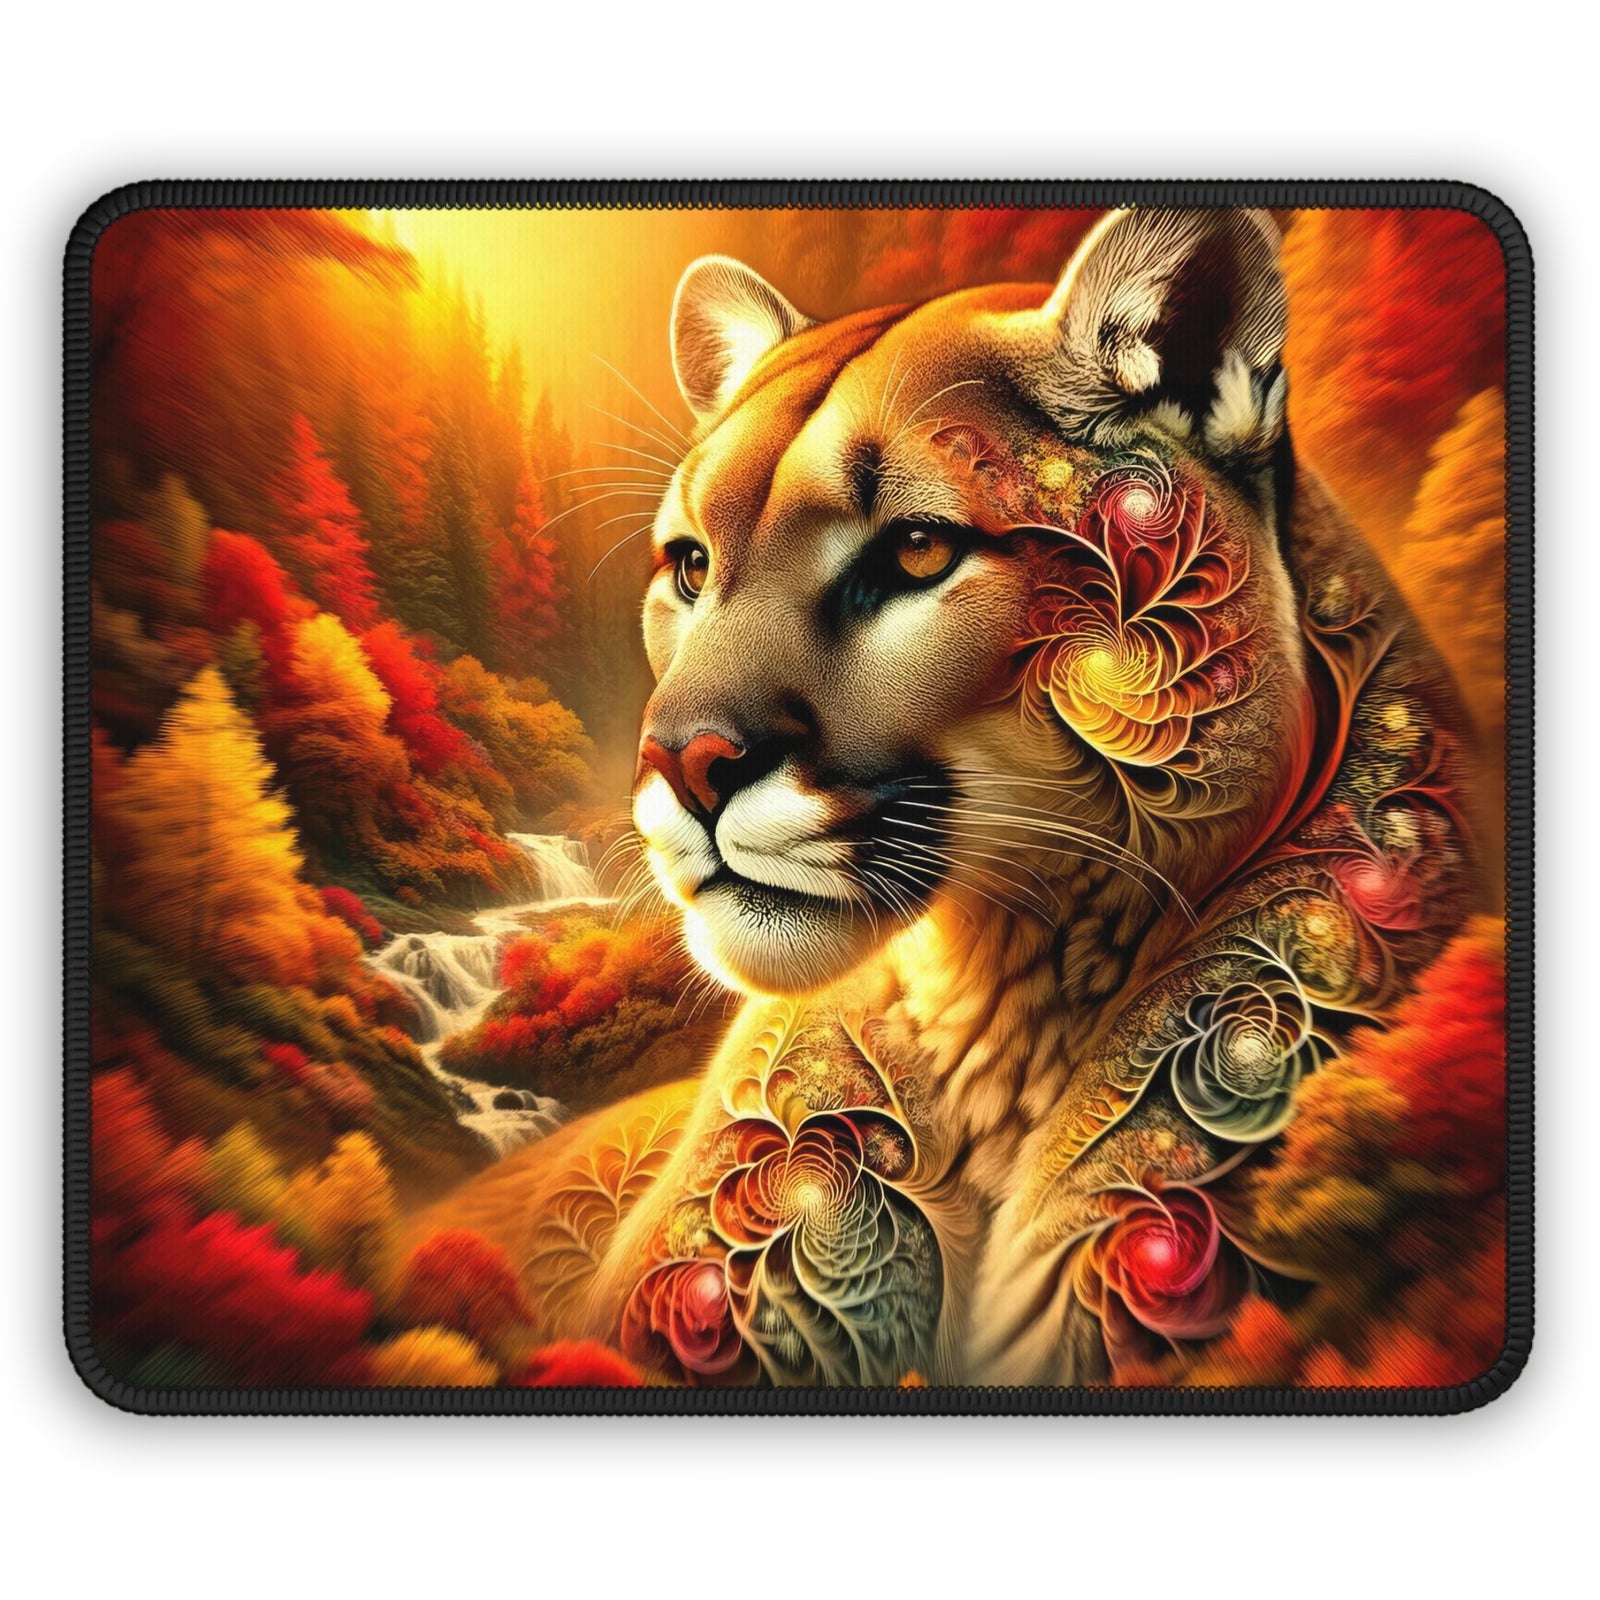 The Cougar's Mosaic Soul Gaming Mouse Pad